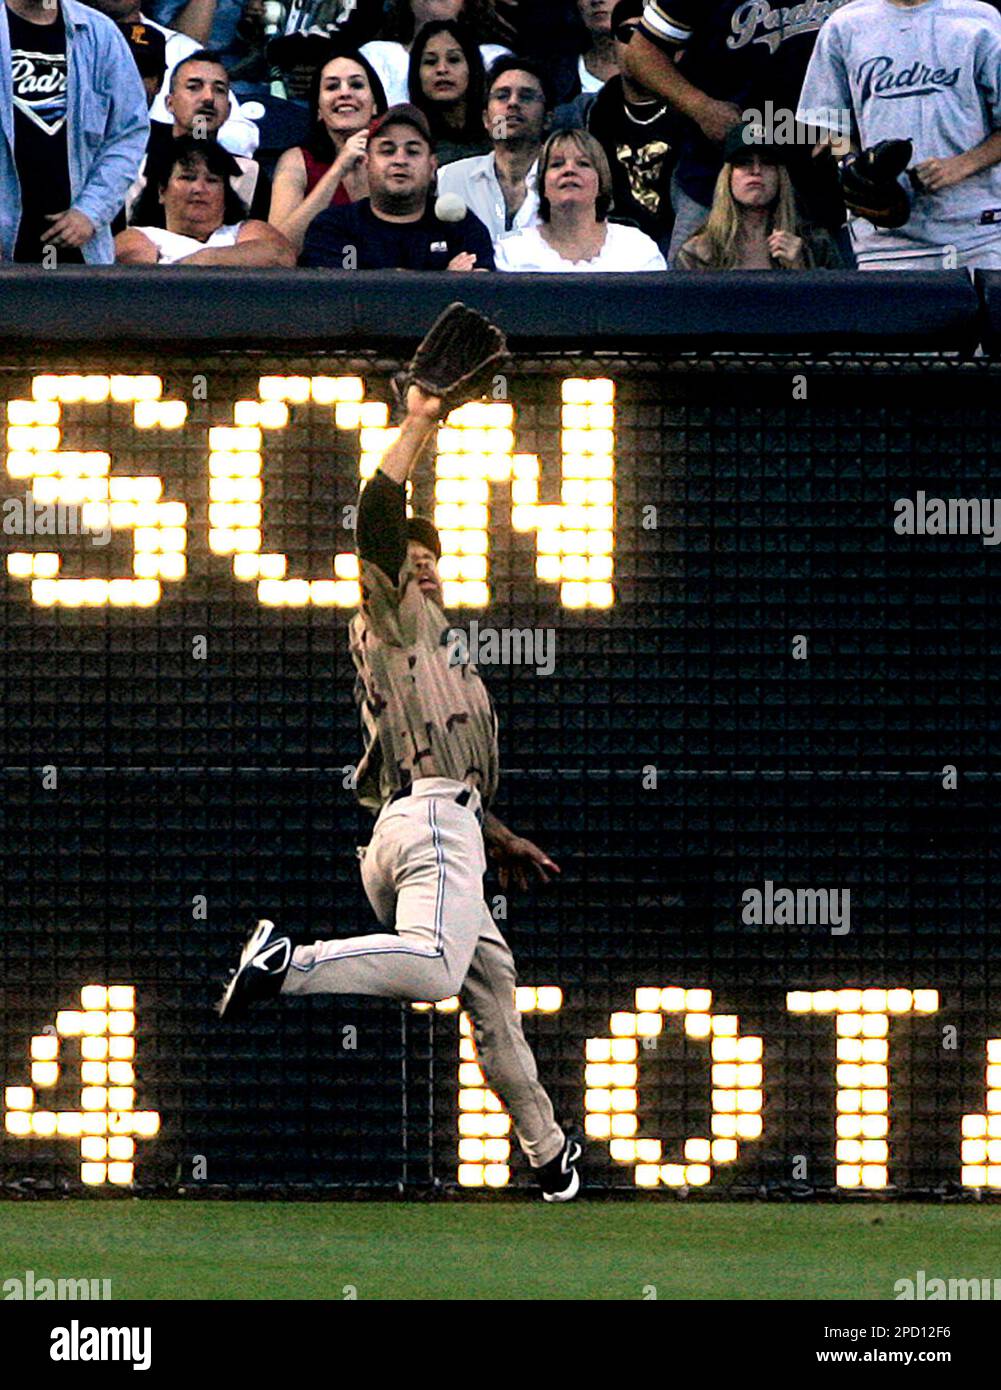 San Diego Padres left fielder Dave Roberts takes an extra base hit away  from Colorado Rockies' Clint Barmes in the sixth inning of their baseball  game Monday, May 29, 2006, in San